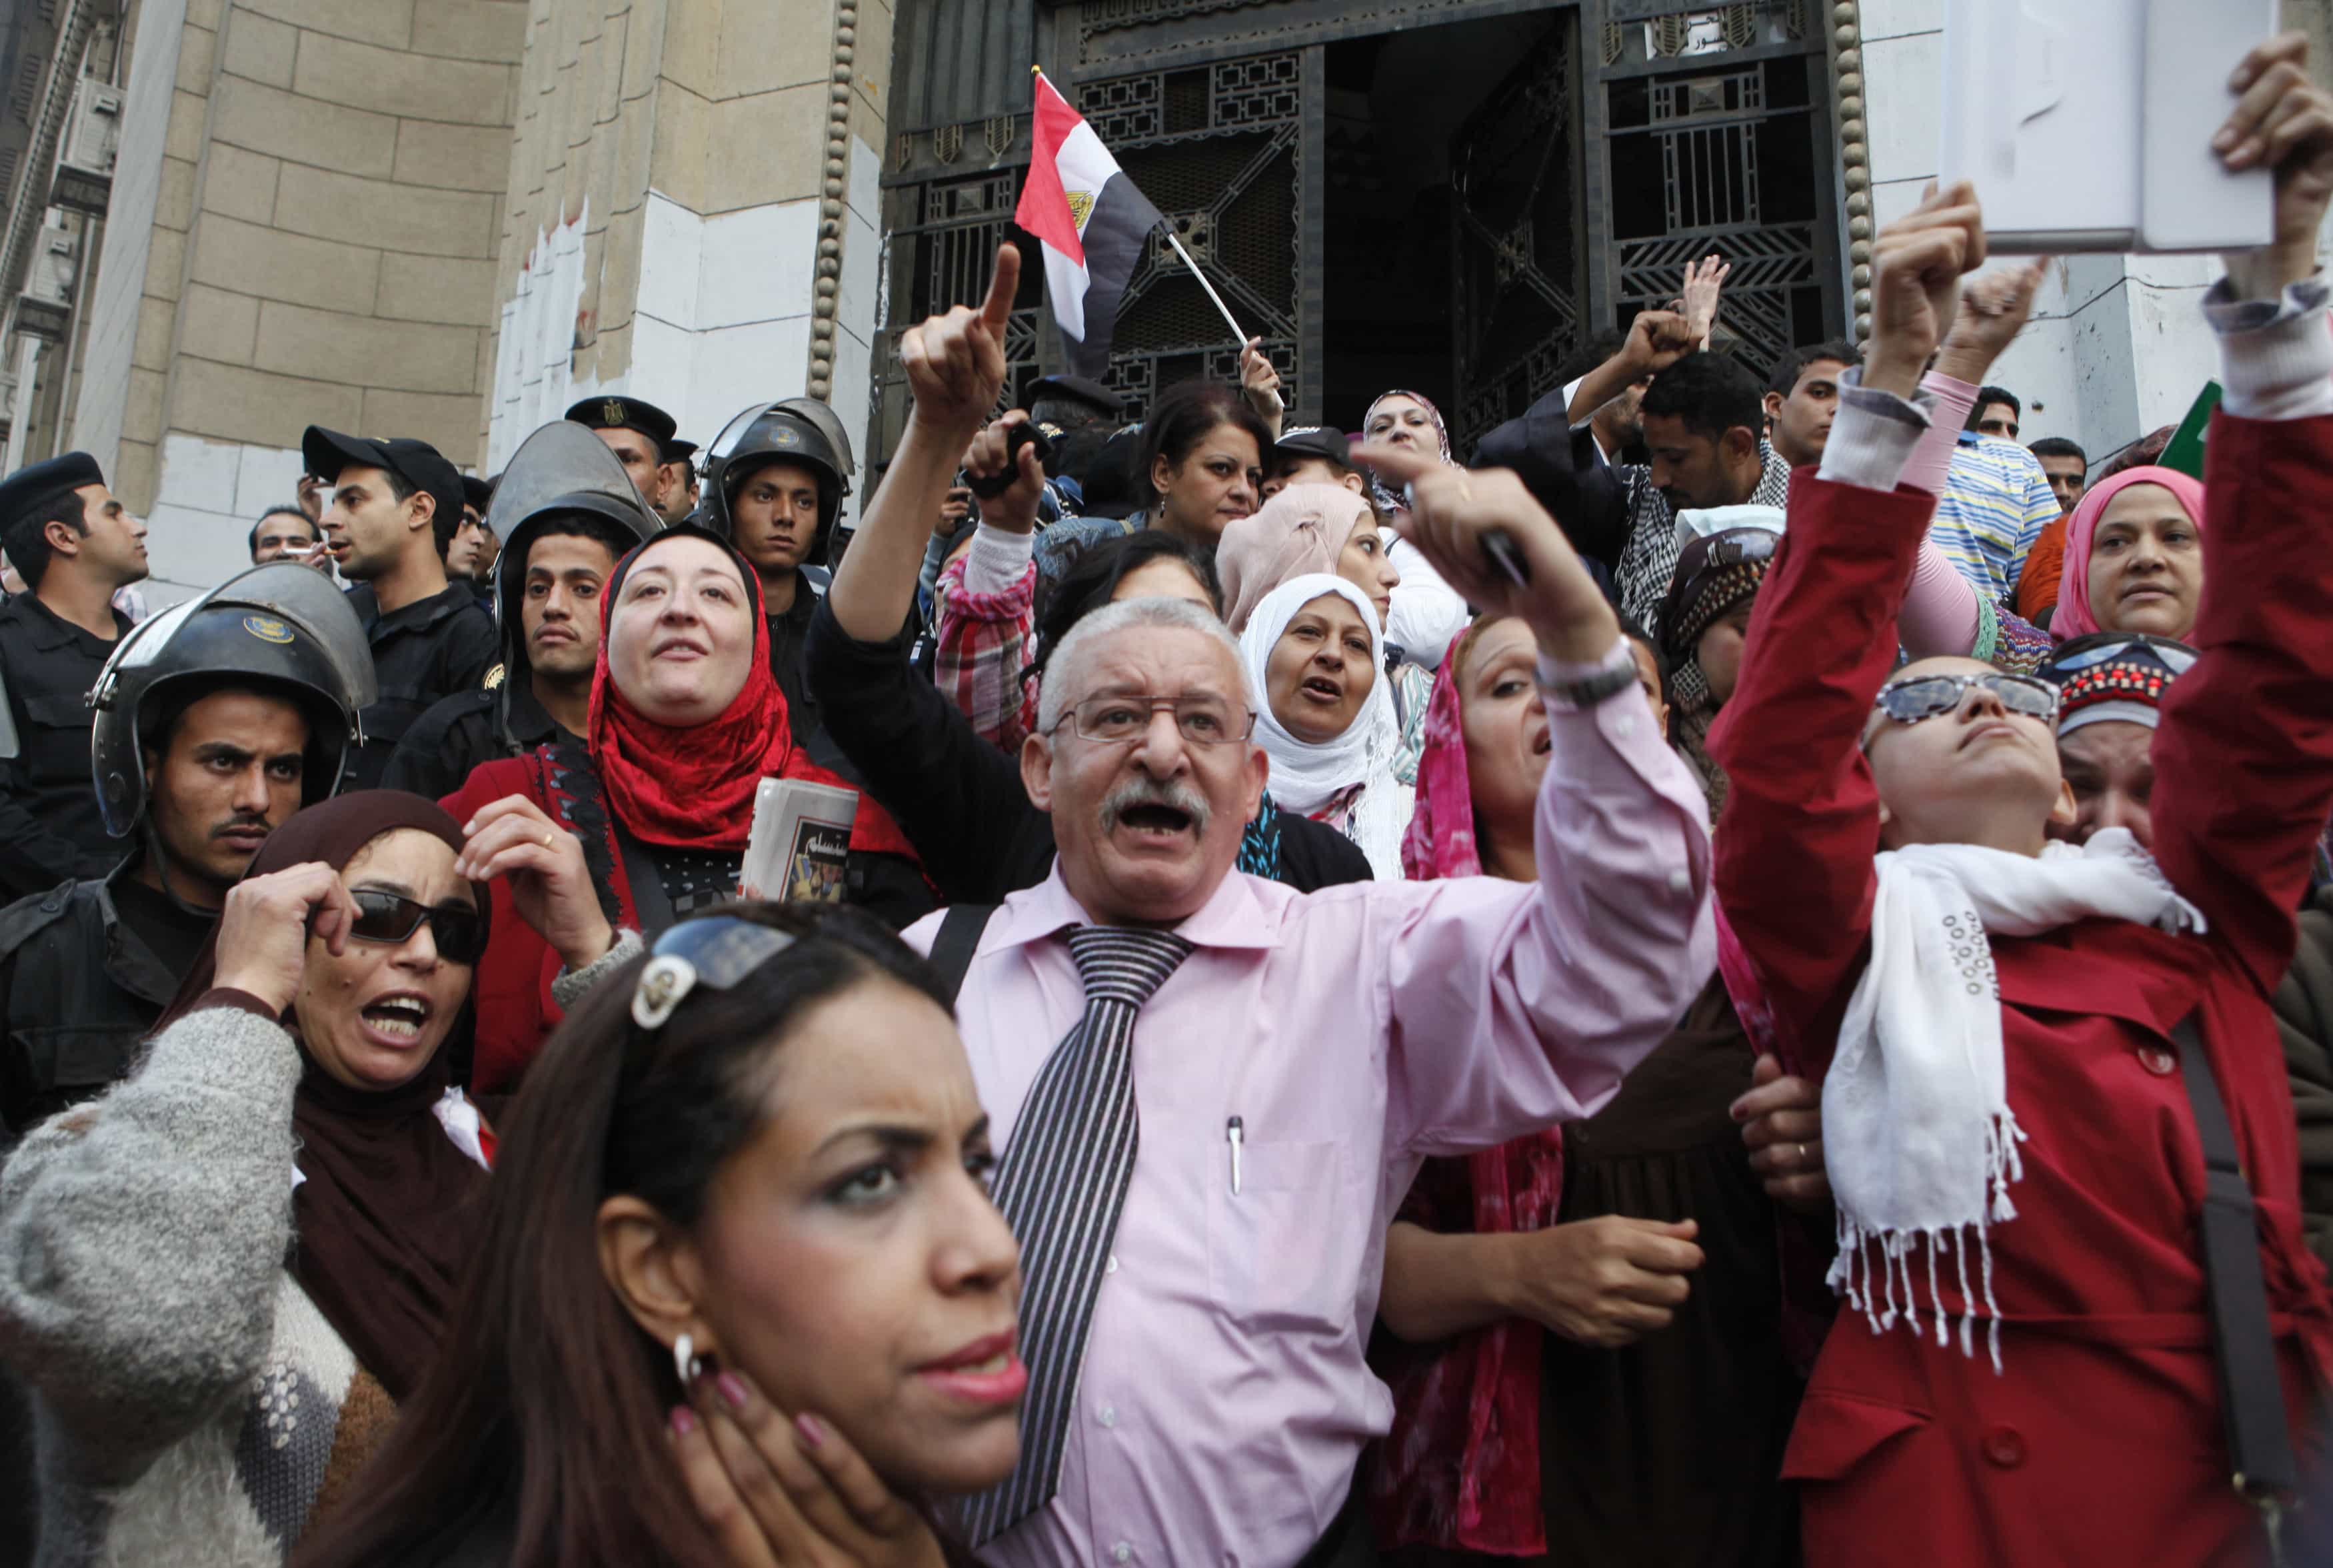 Anti-Morsi protesters chant slogans in front of the Supreme Judicial Council building in Cairo, on 24 November 2012, REUTERS/Asmaa Waguih